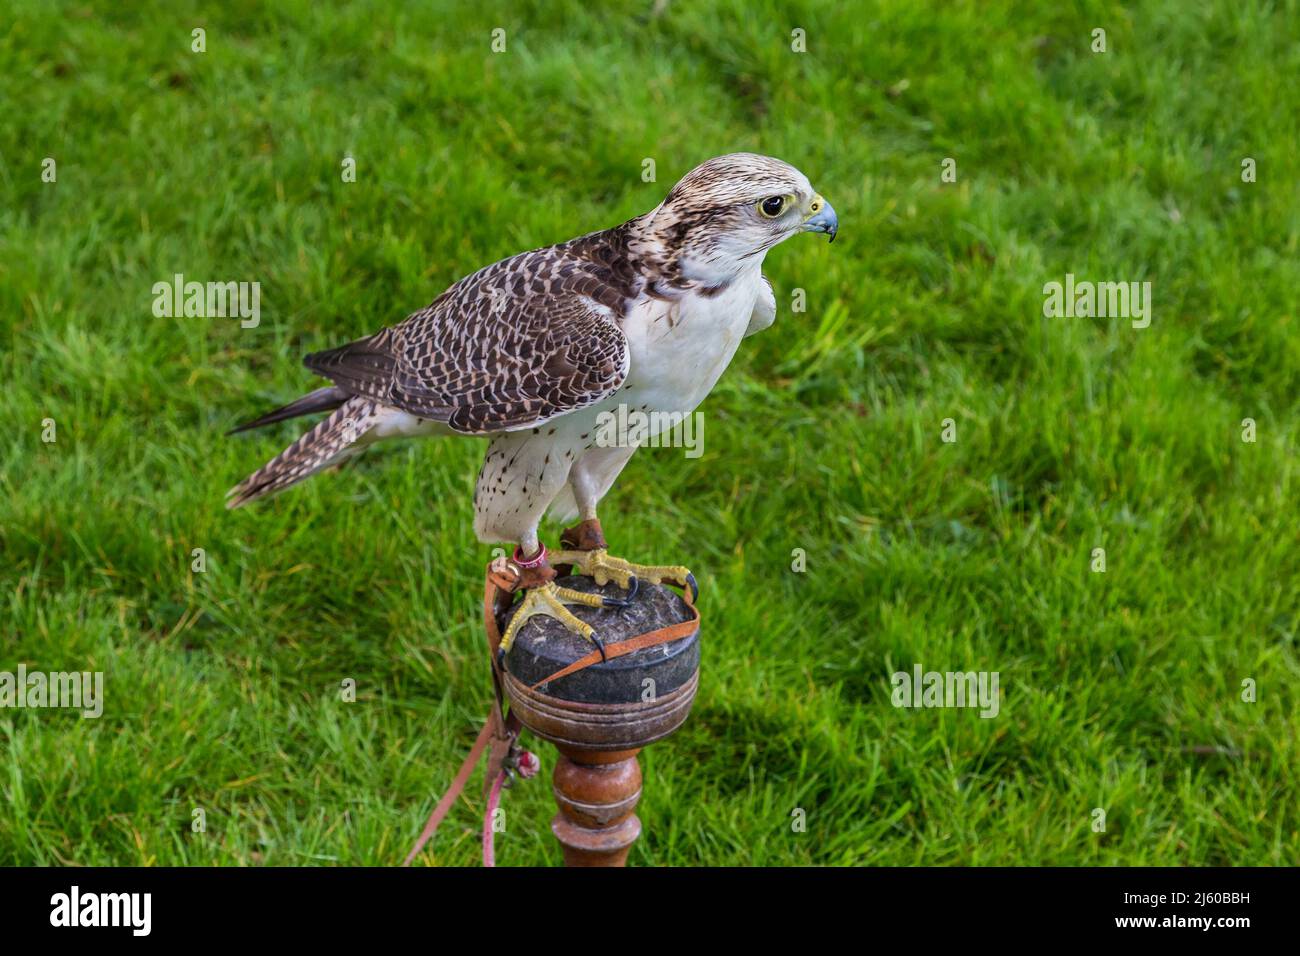 A Lanner Falcon stands alert on a perch before being flown at a falconry display. Stock Photo